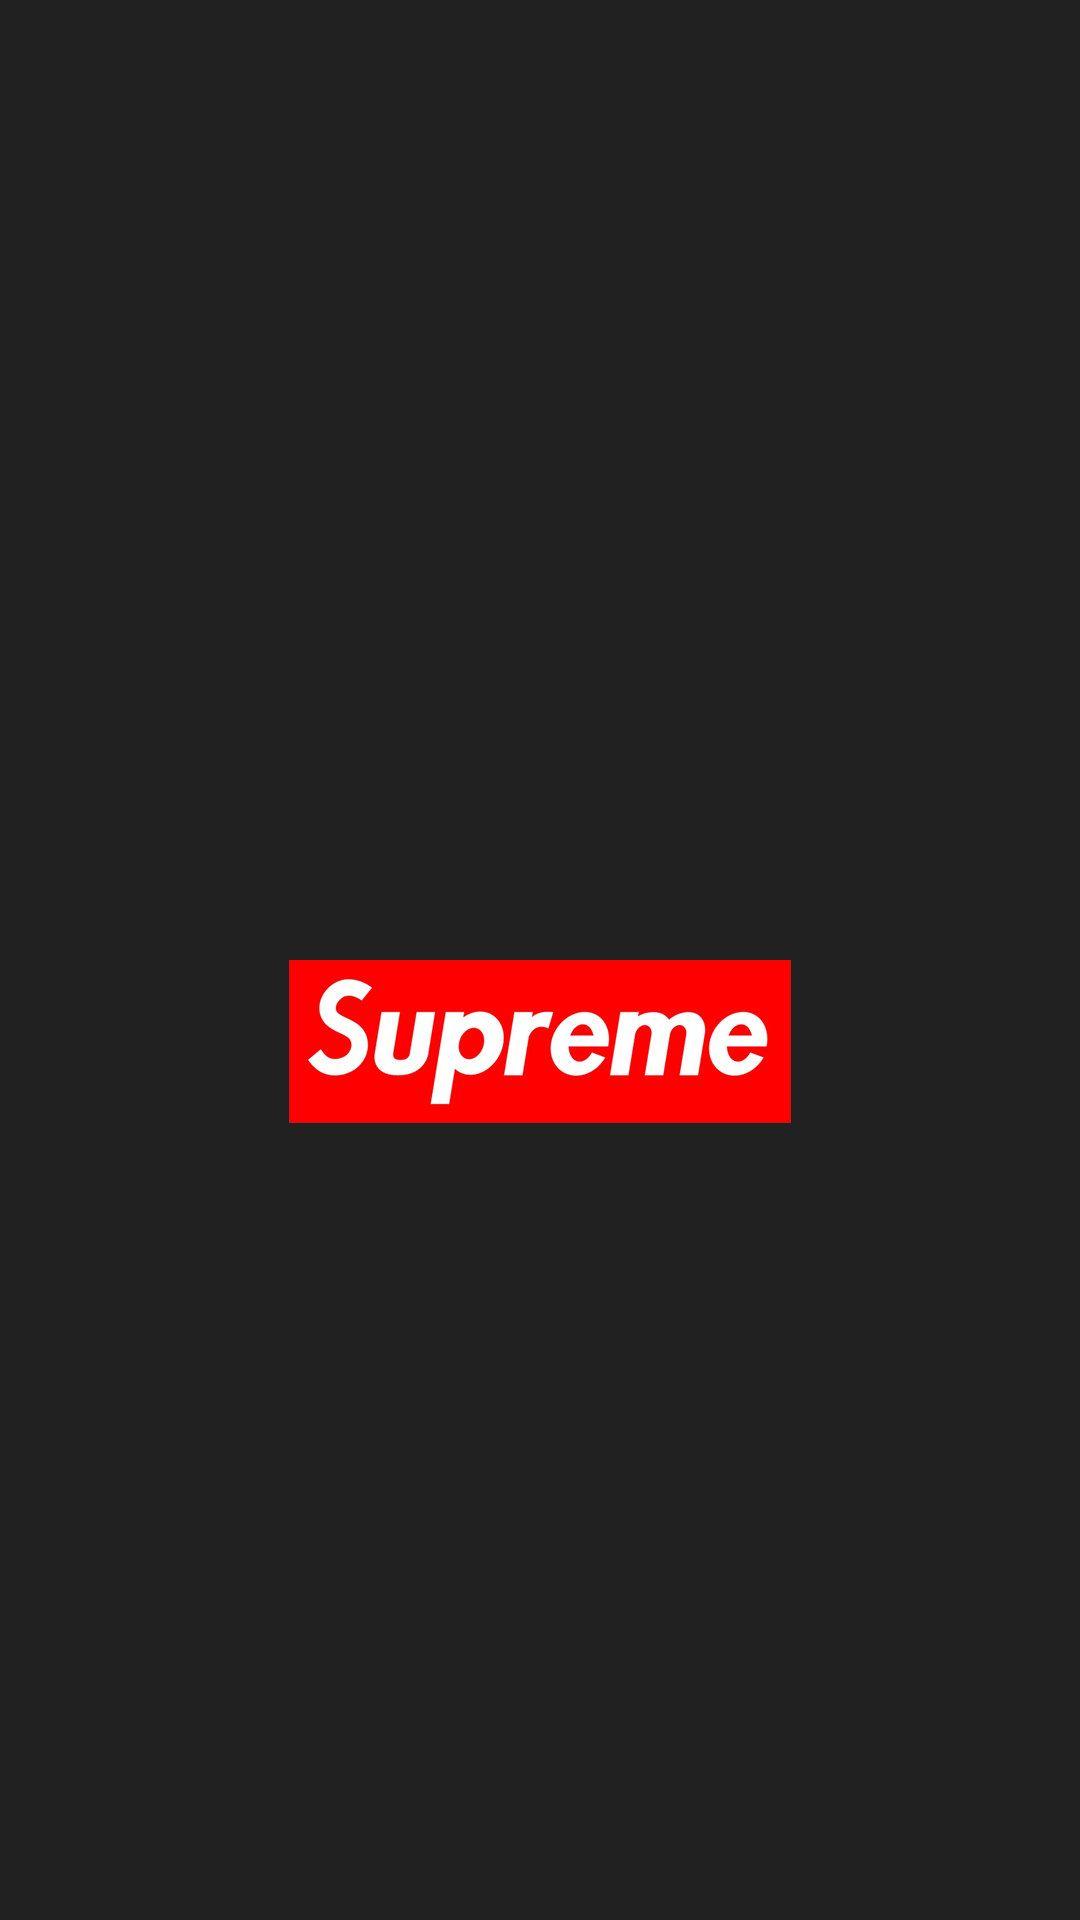 Supreme iPhone Wallpapers - Top Free Supreme iPhone Backgrounds ...